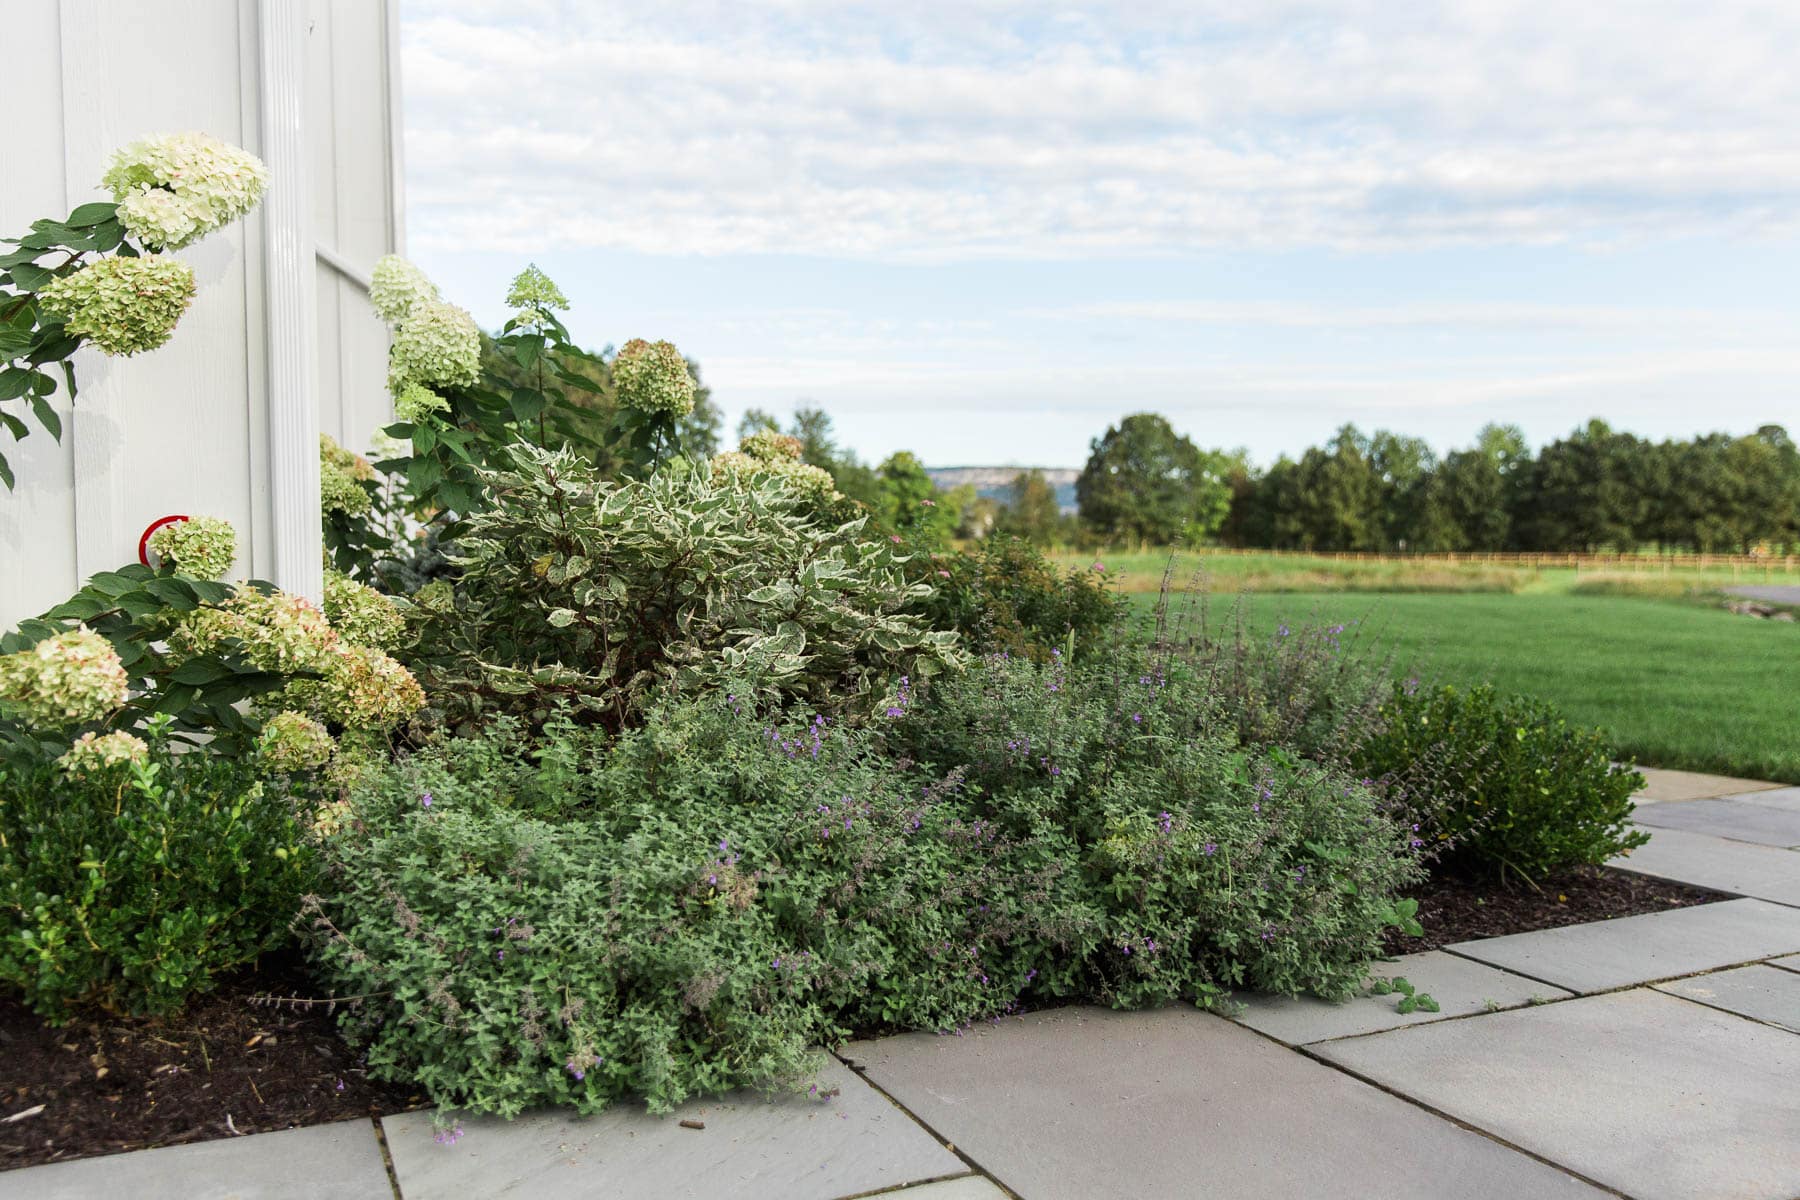 A bed space within a rectilinear walkway featuring native to New York plantings like Nepeta, Hydrangea, boxwood, and Dogwood in Gardiner, NY, installed by Masseo Landscape, Inc.